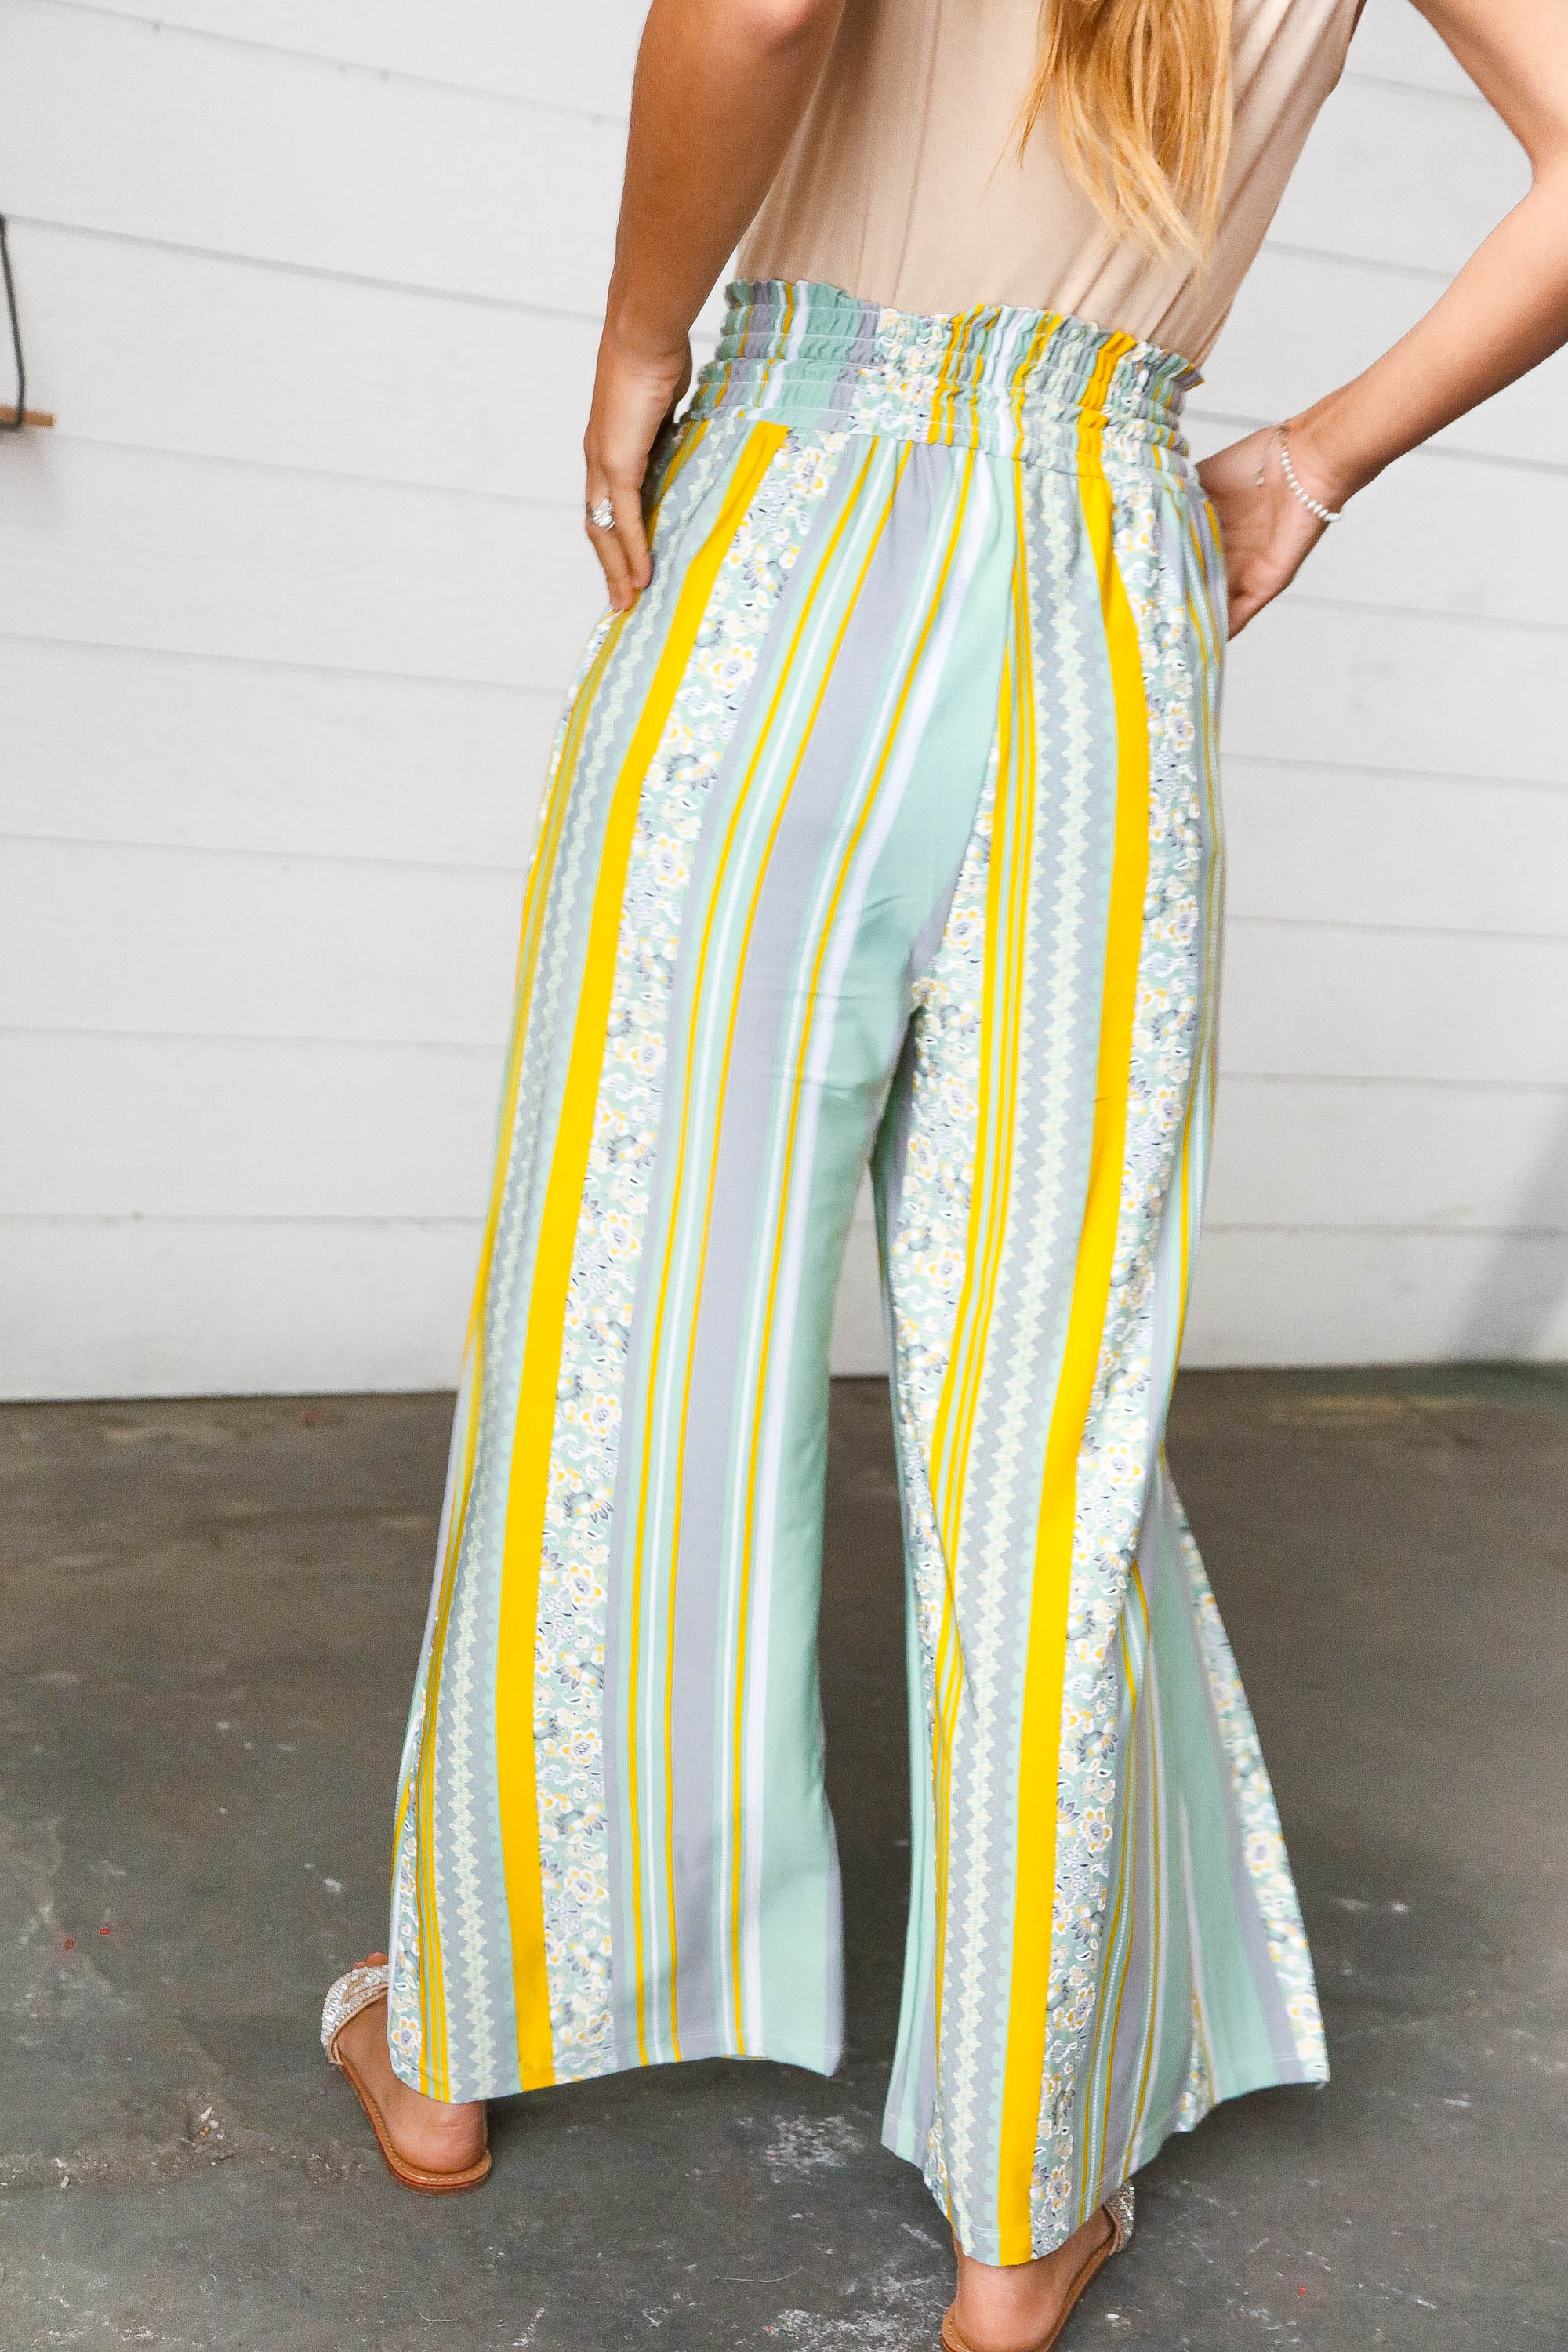 Mint Floral Print & Vertical Line Slit Palazzo Pants AndTheWhy